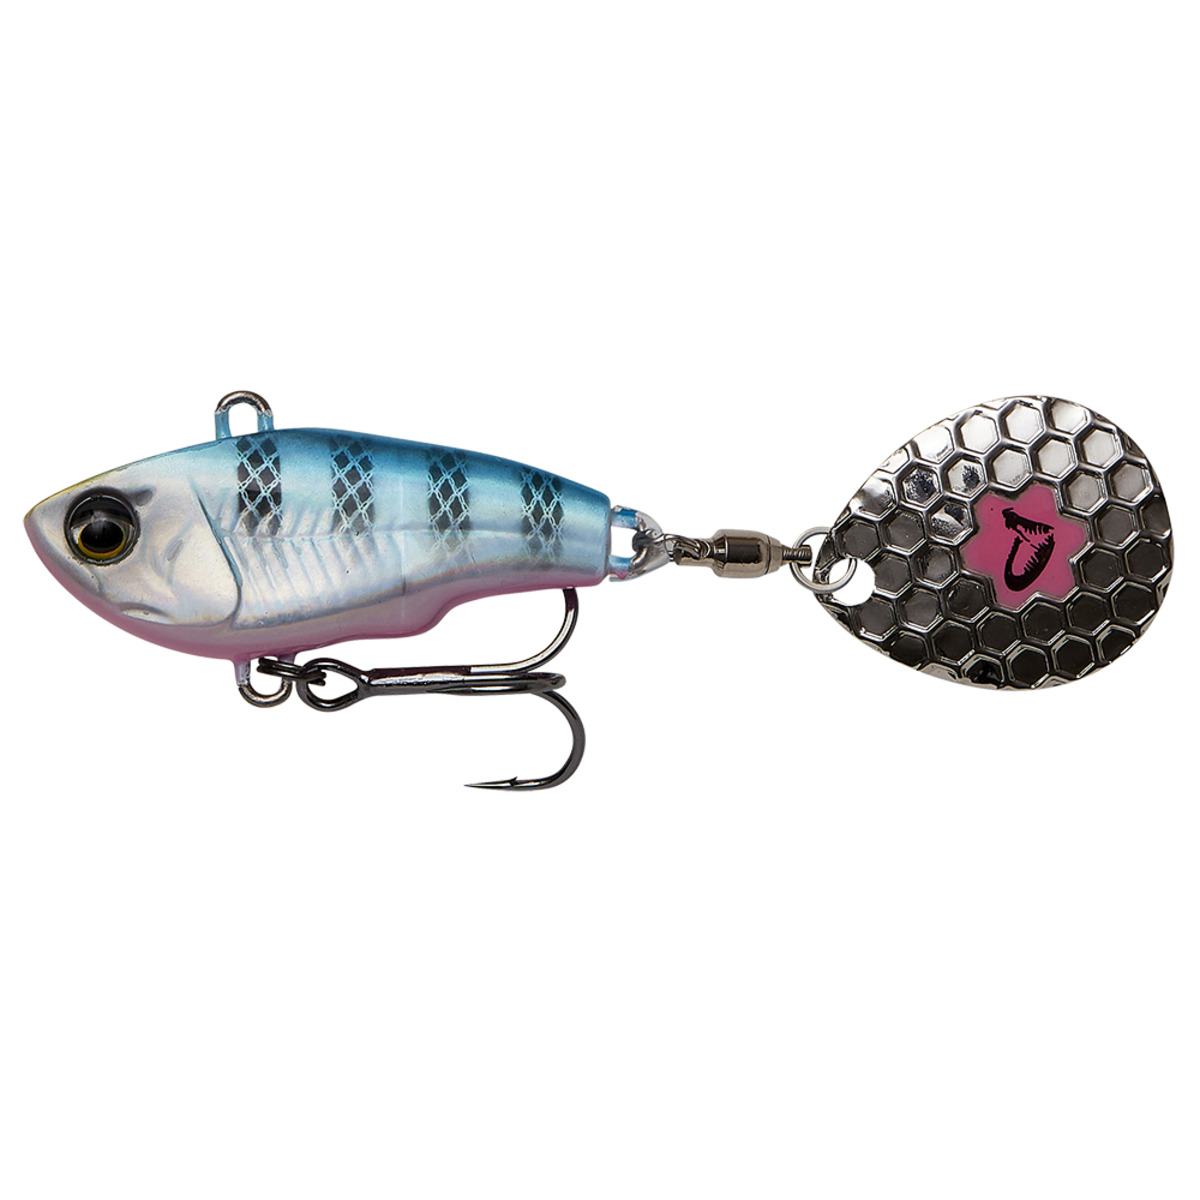 Savage Gear Fat Tail Spin 5.5cm 9g Sinking - BLUE SILVER PINK